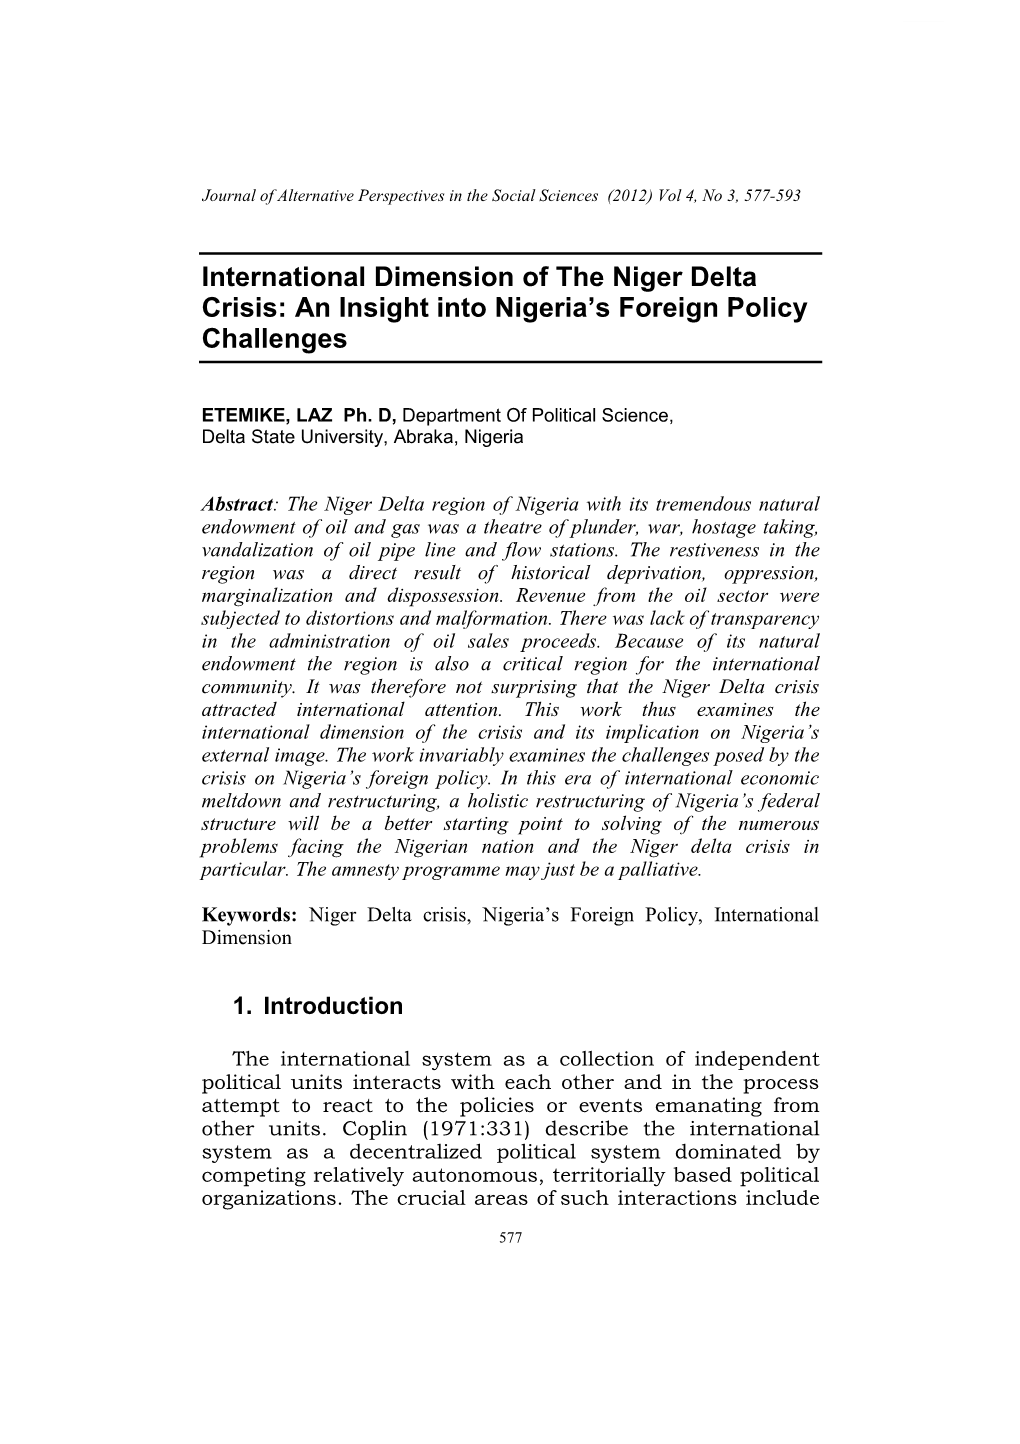 International Dimension of the Niger Delta Crisis: an Insight Into Nigeria’S Foreign Policy Challenges